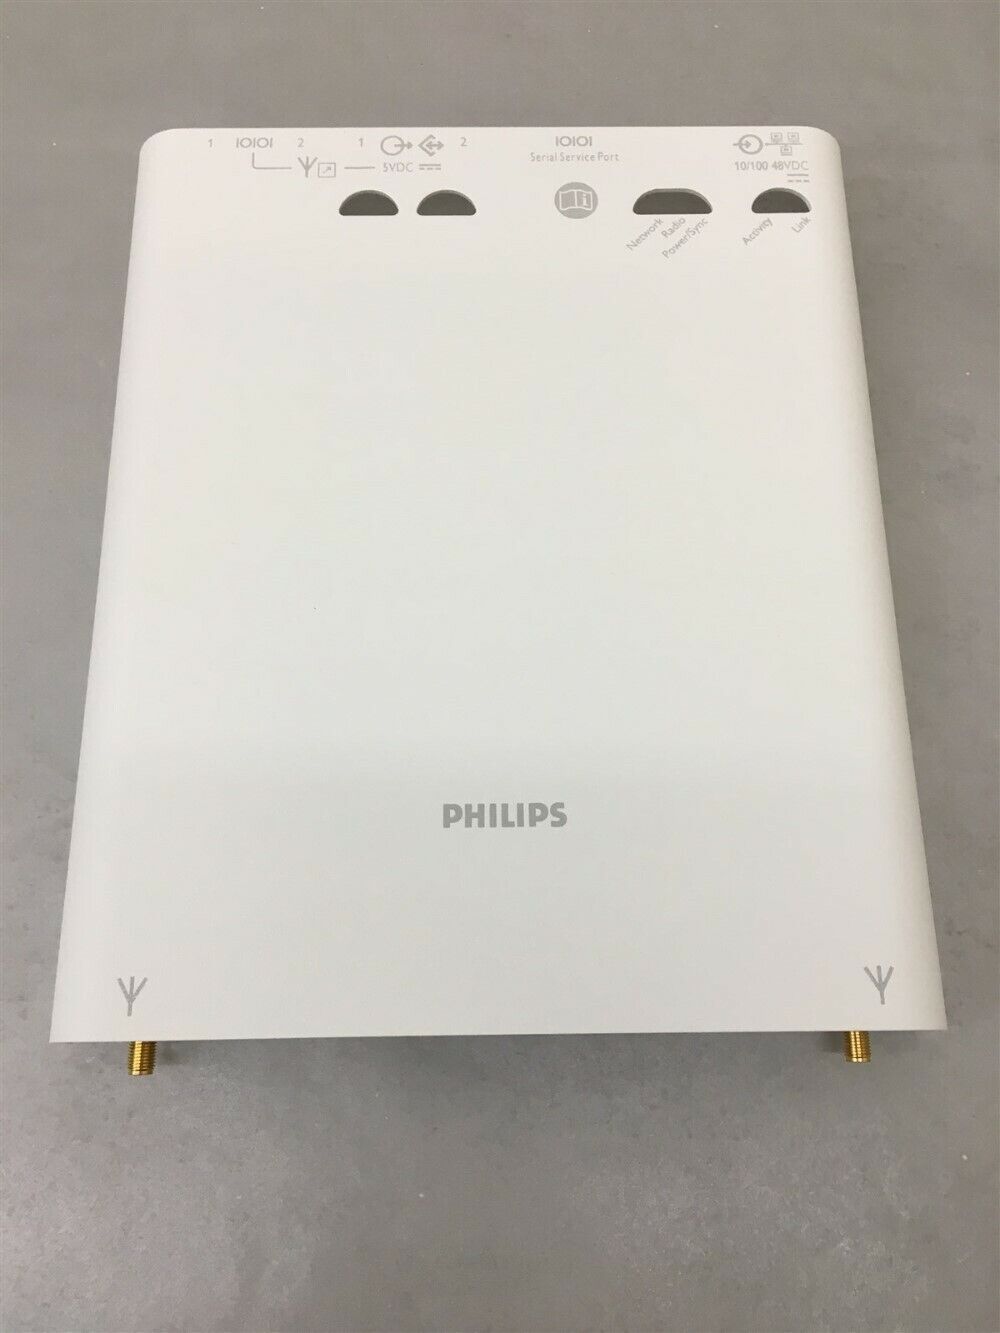 New Philips Medical Systems 866394, ITS4843C Smart-Hopping 1.4GHz AP w/ Antennas